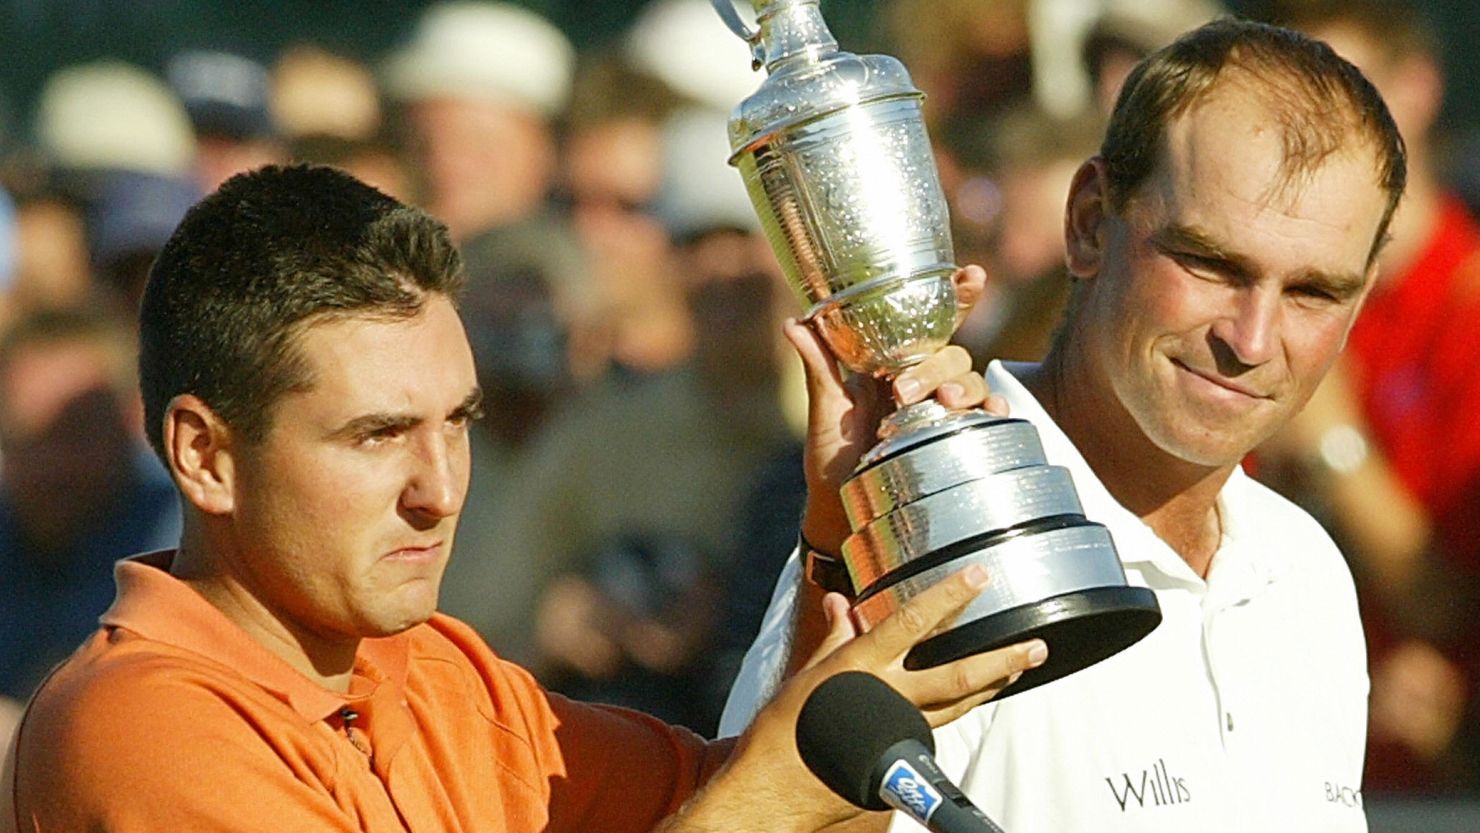 Thomas Bjorn watched little known American Ben Curtis lift the trophy at the British Open in 2003. 